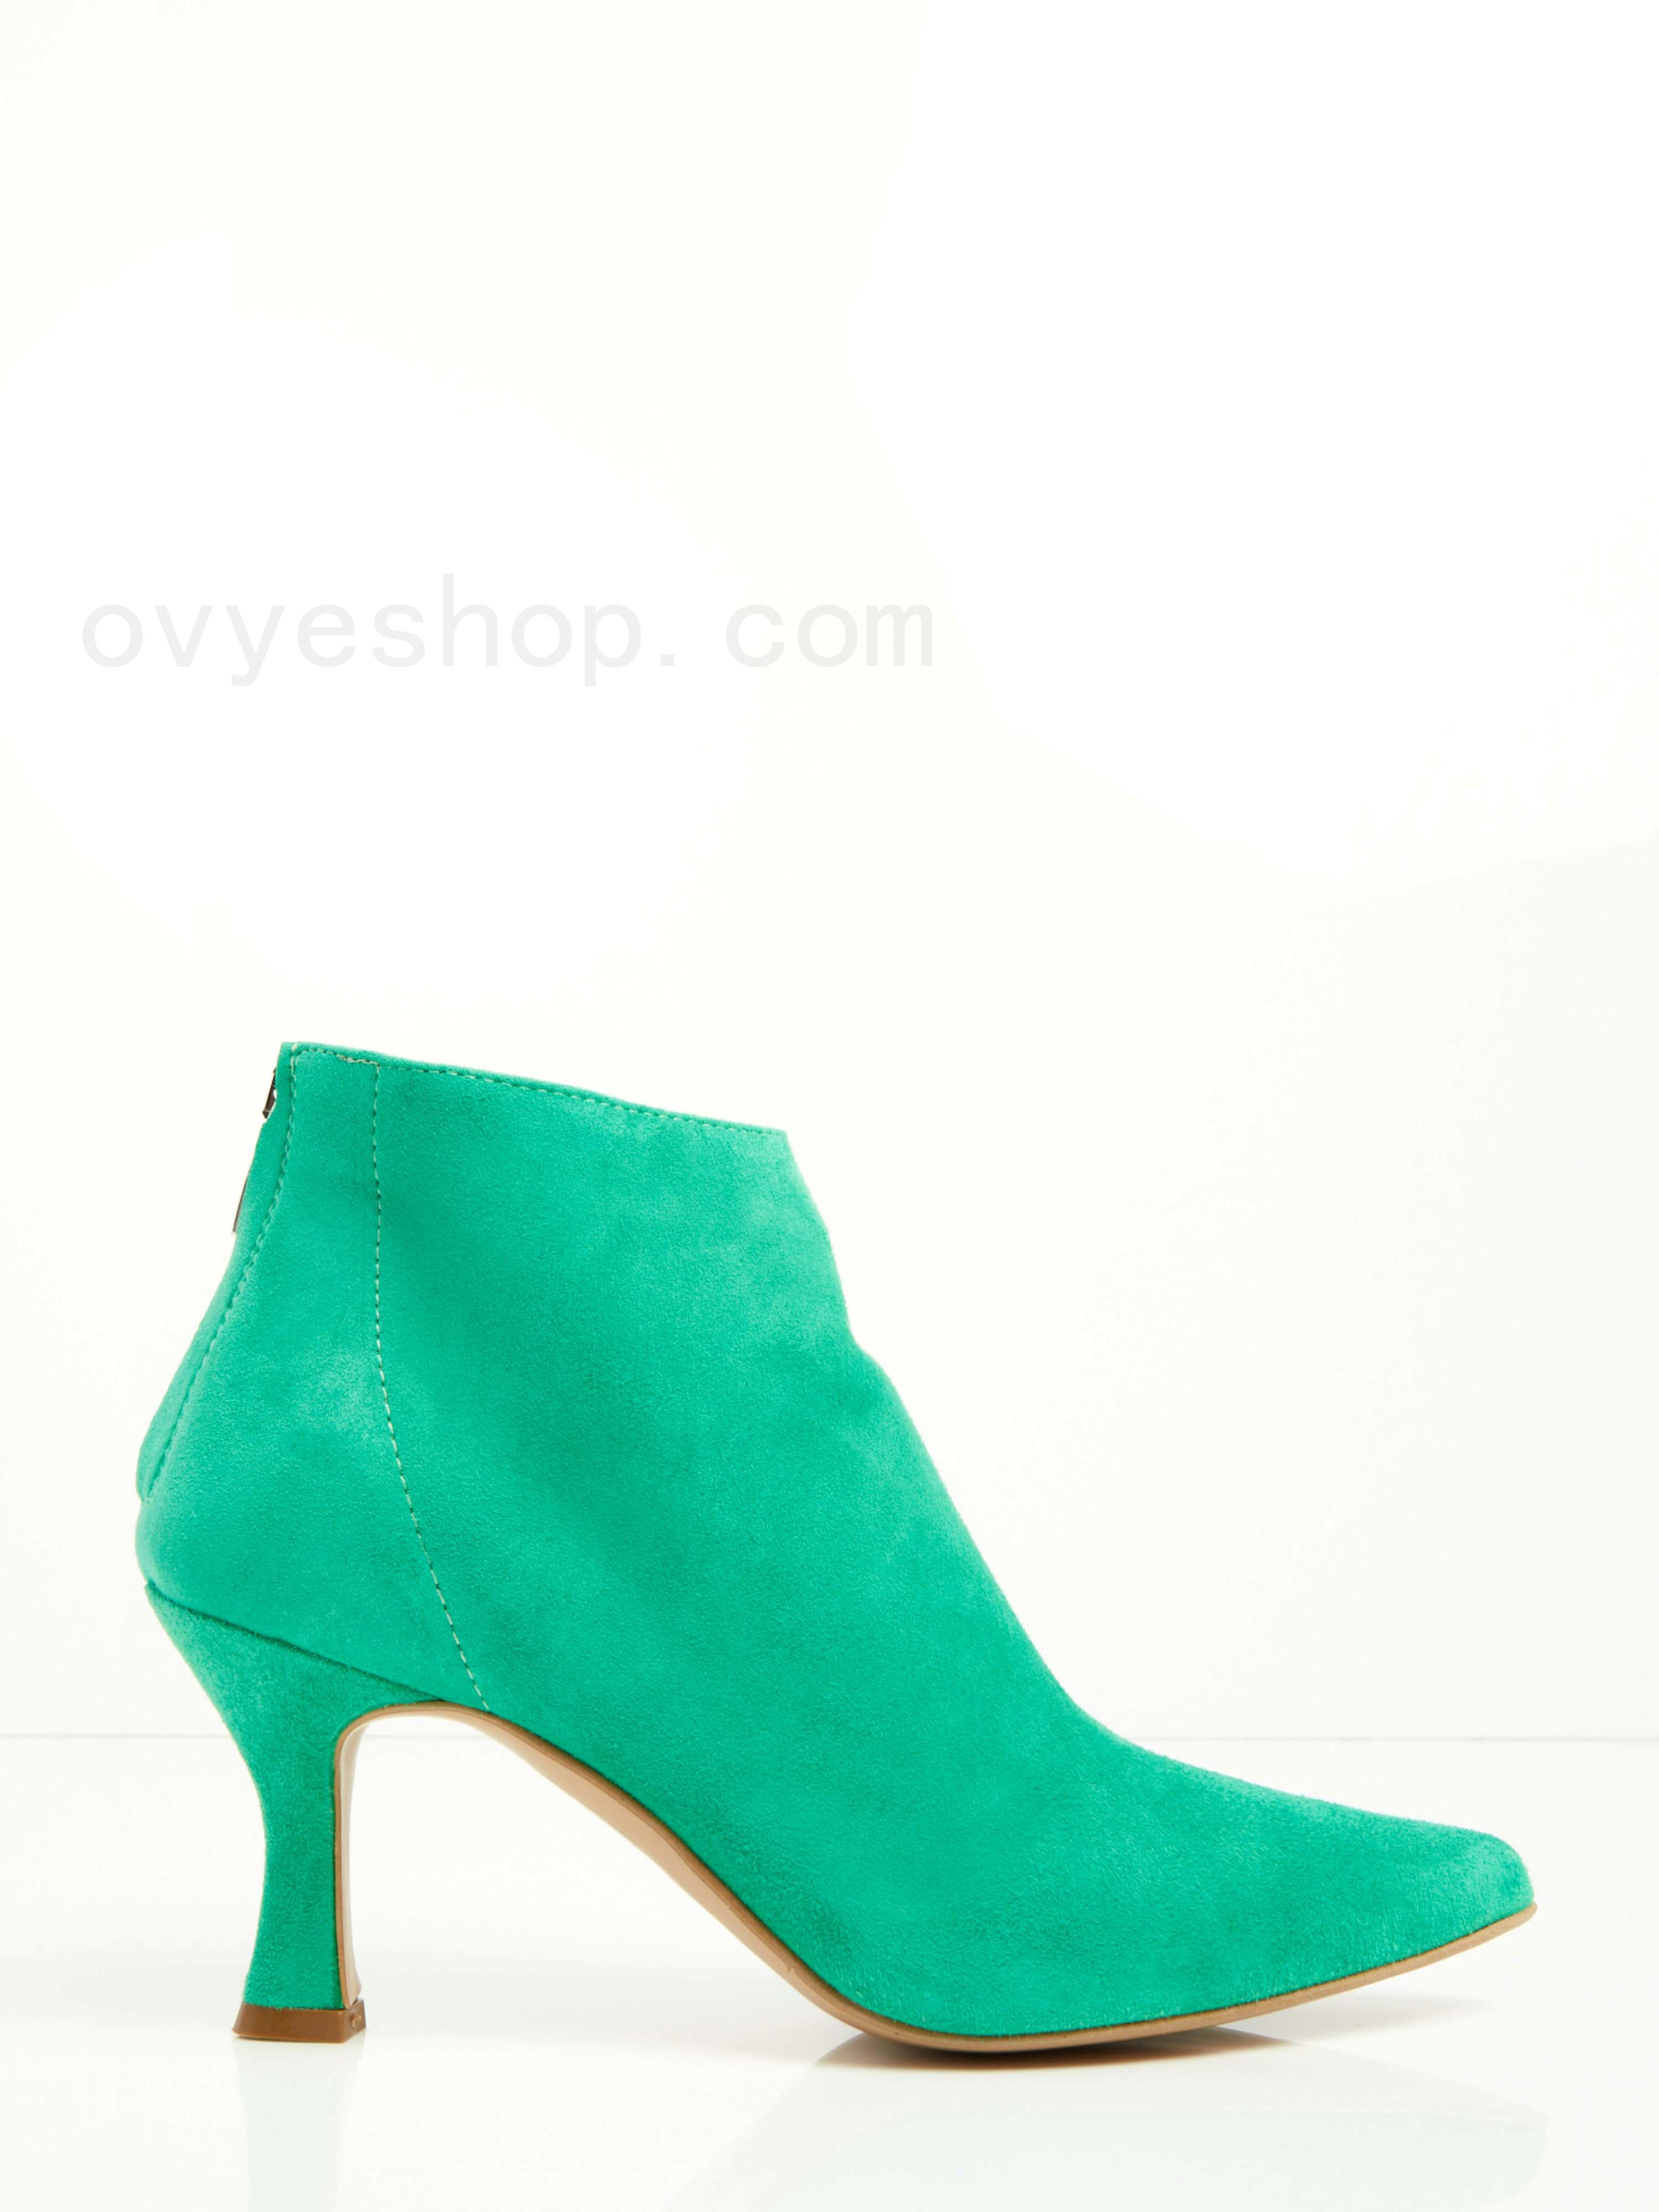 Migliori Suede Ankle Boots F0817885-0414 On Line